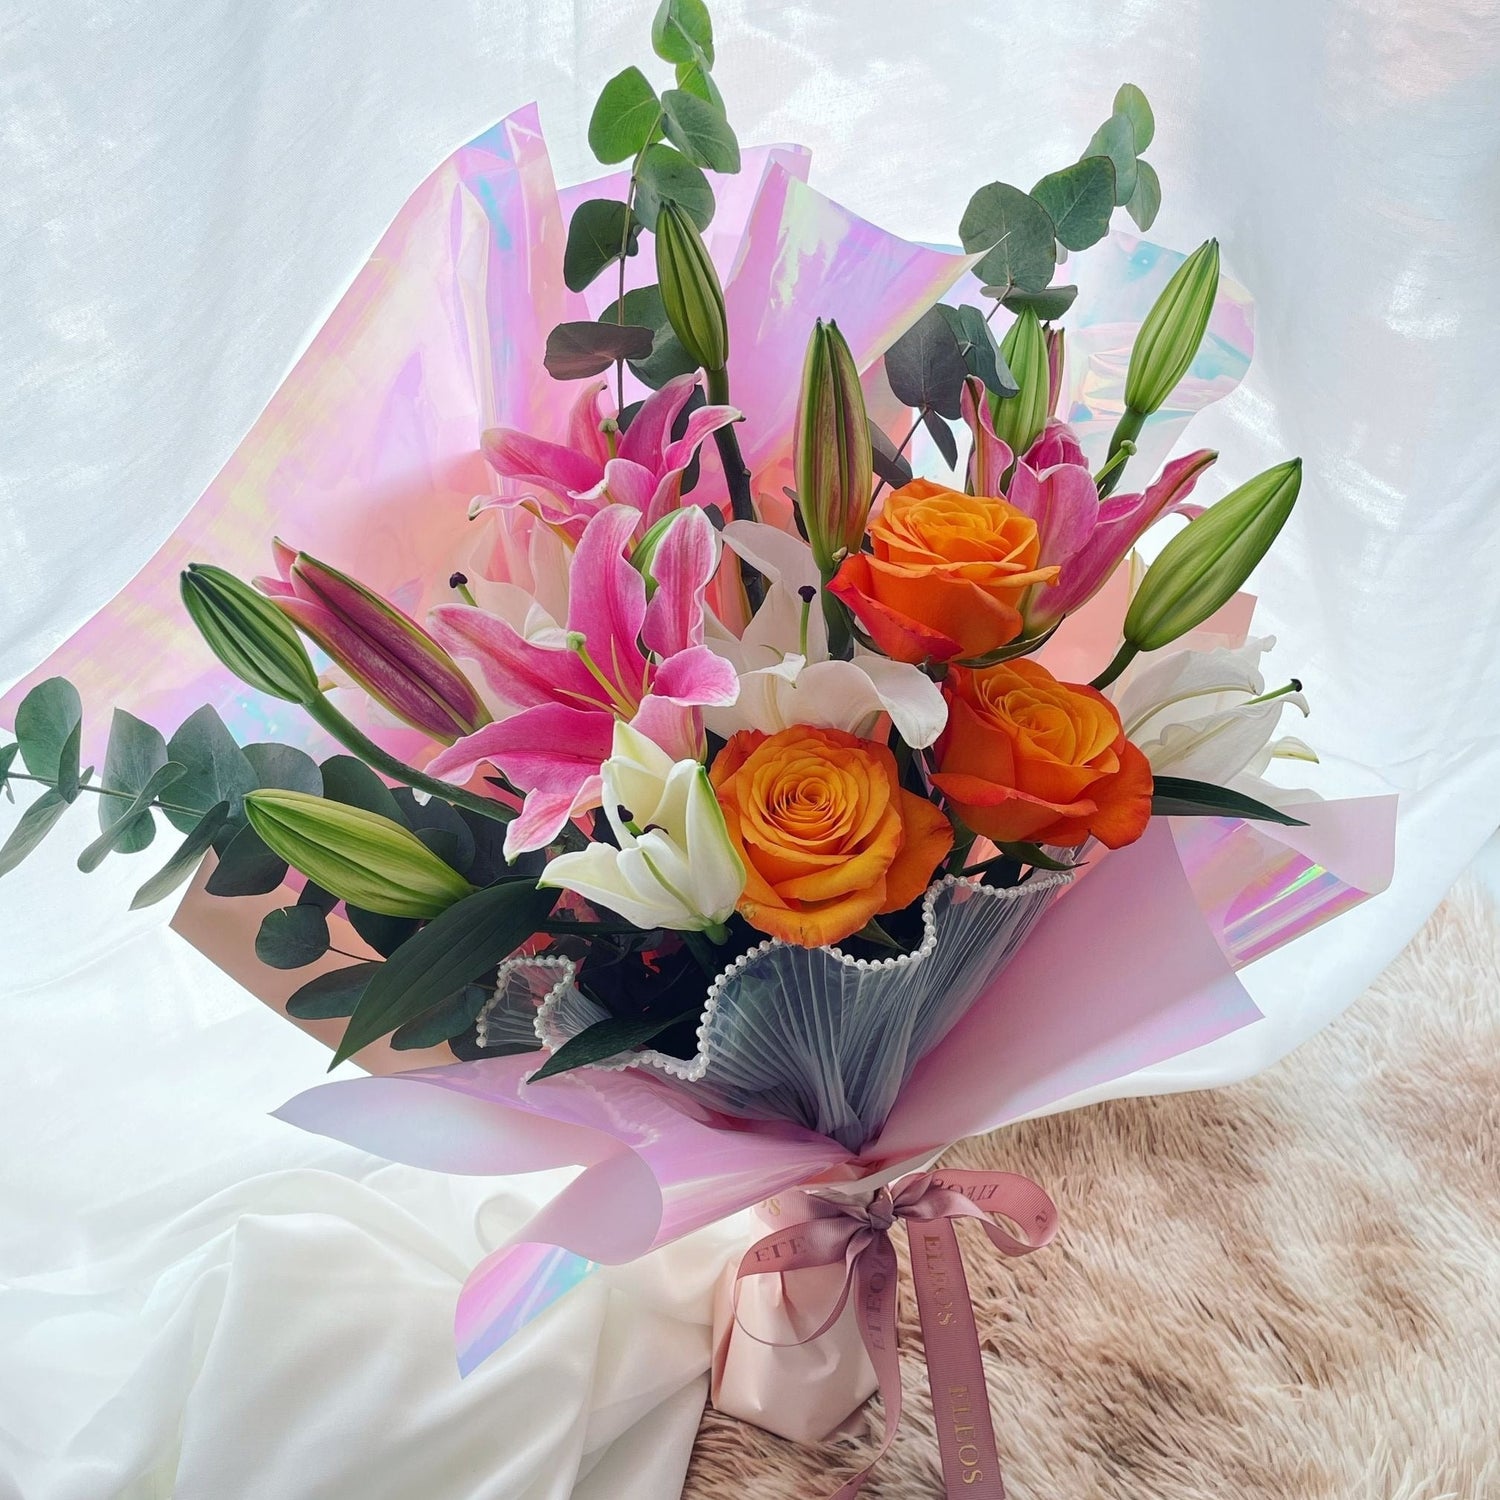 Affordable Cheap Fresh Lilies and Roses Princess Lily Bouquet in Singapore below $80 with Free Delivery